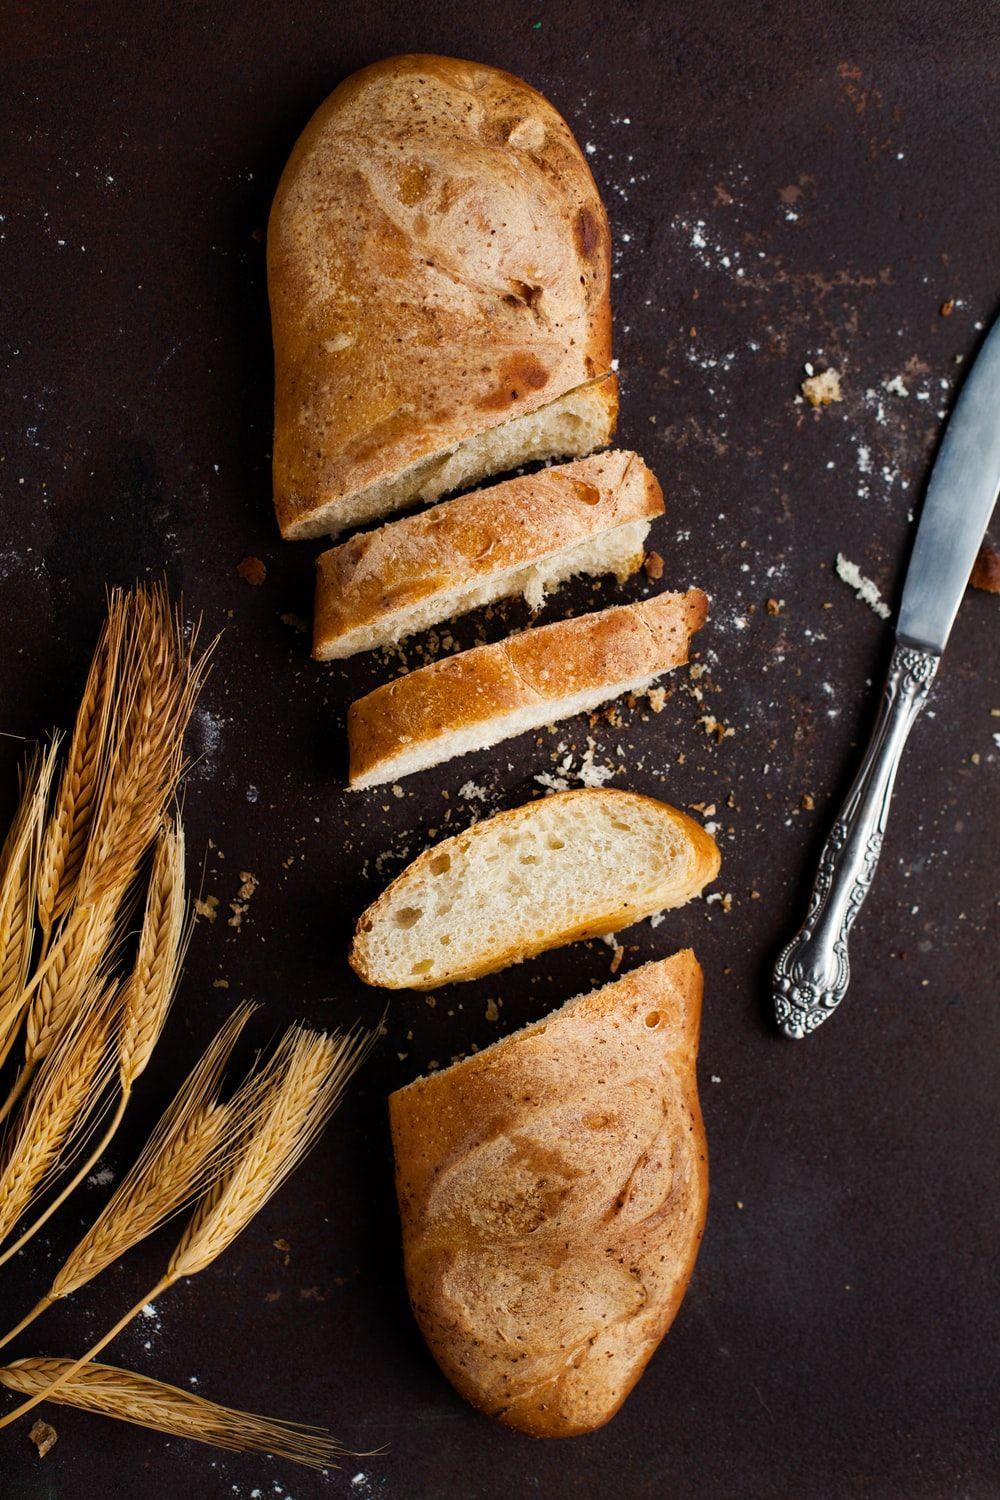 Bread Picture. Download Free Image